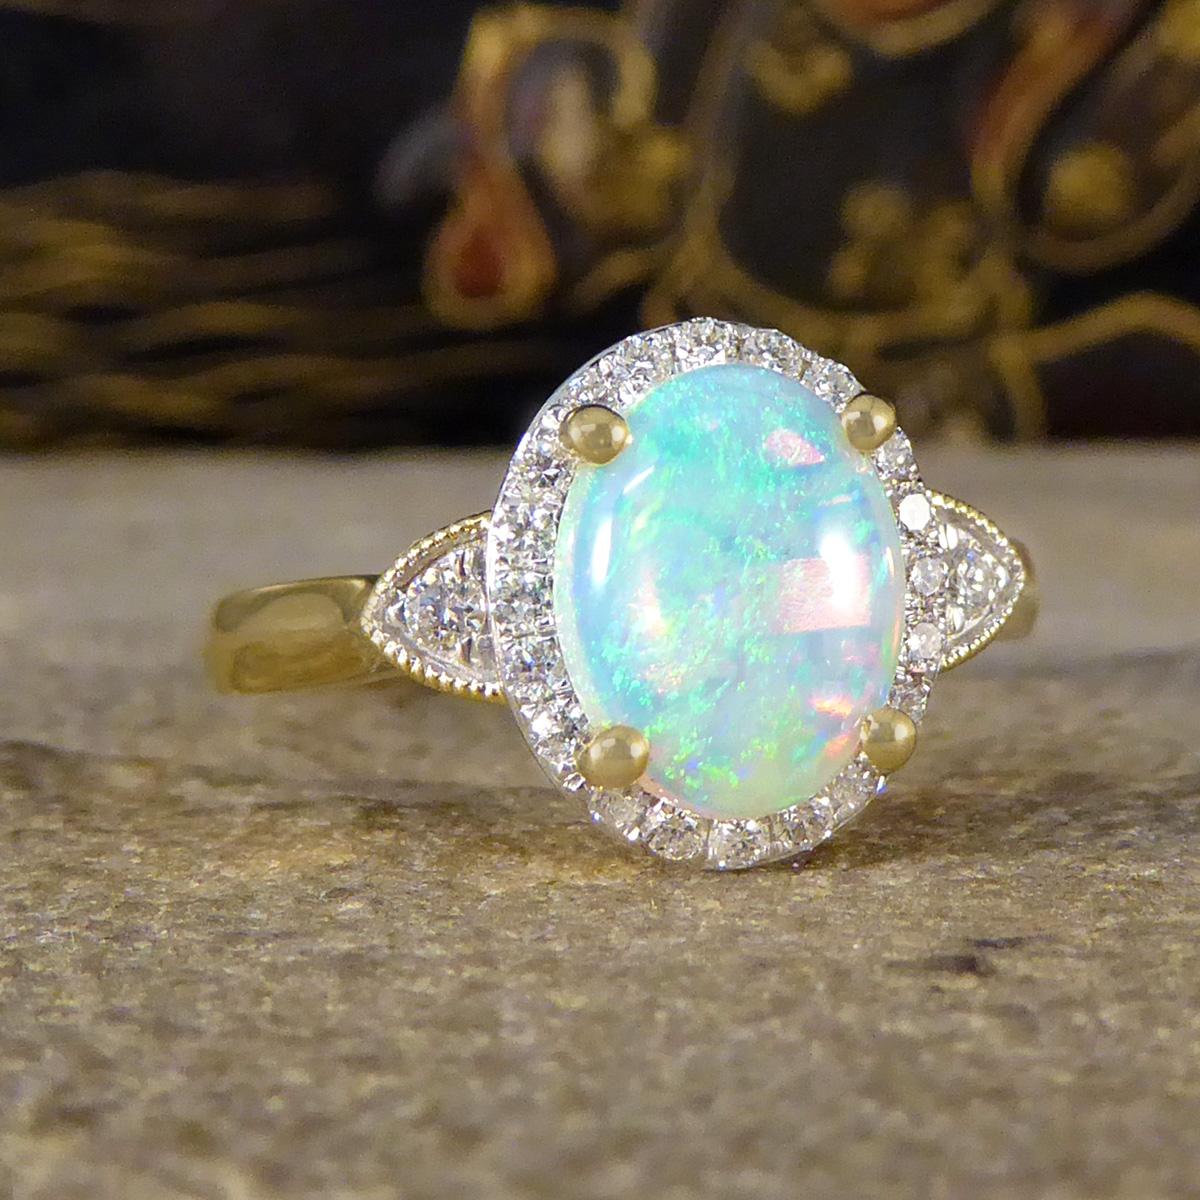 A modern and colour Opal cluster ring. This ring features an Opal in the centre showing a lovely span of colours from Oranges and Yellows to blues and Greens, in a four claw setting holding it securely into place. Surrounding the Opal are 20 small